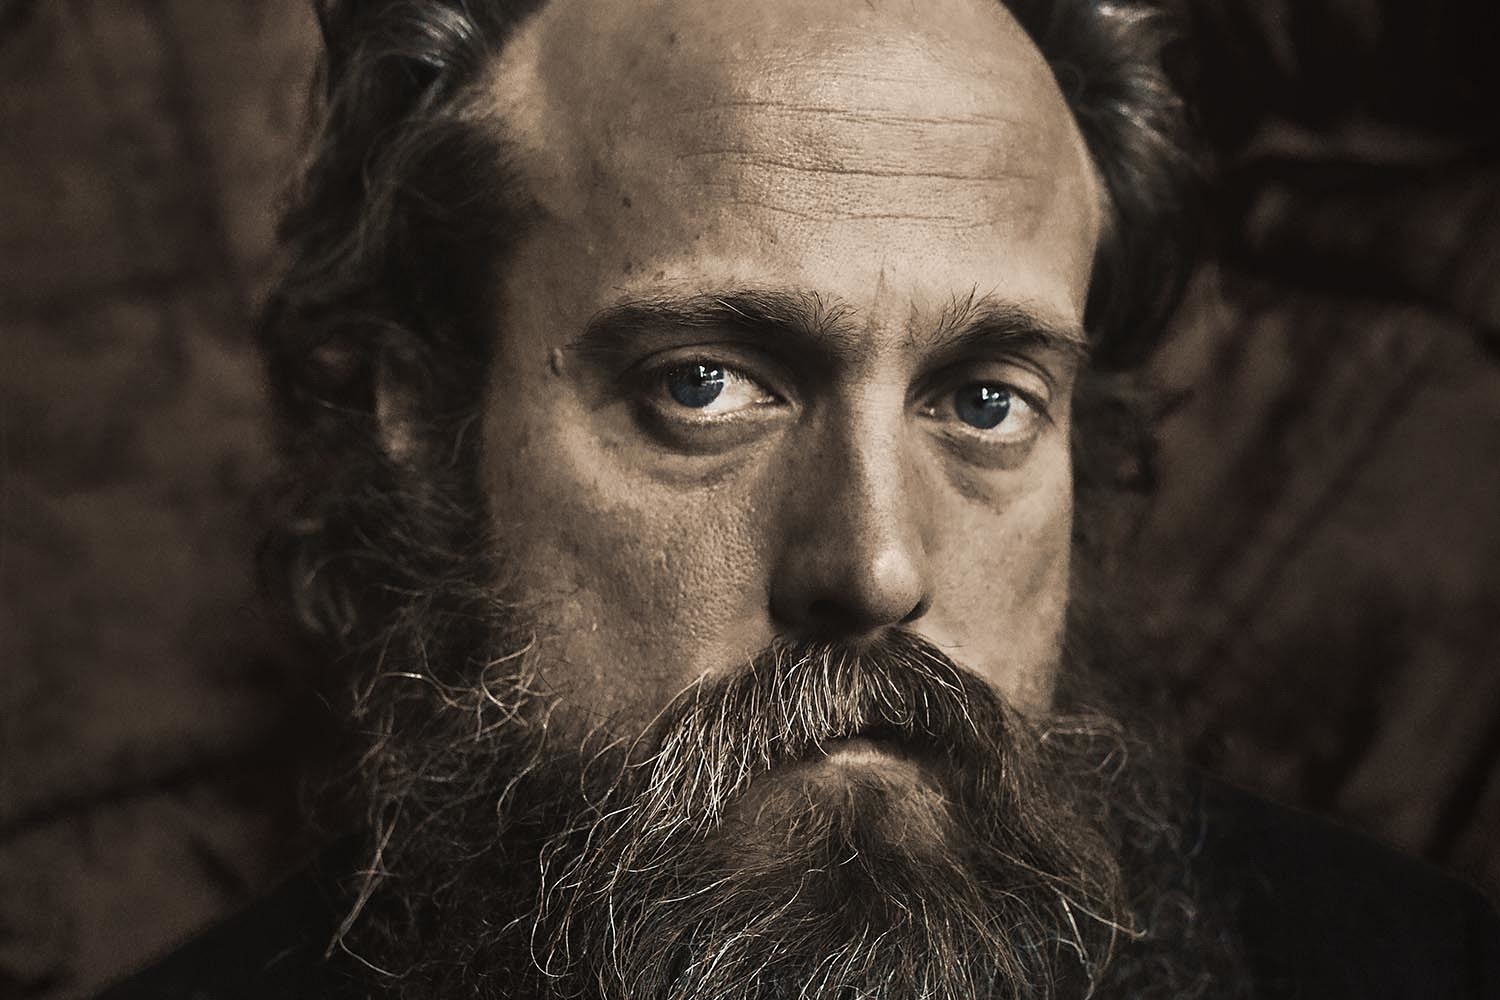 Iron & Wine announce ‘Our Endless Numbered Days’ reissue